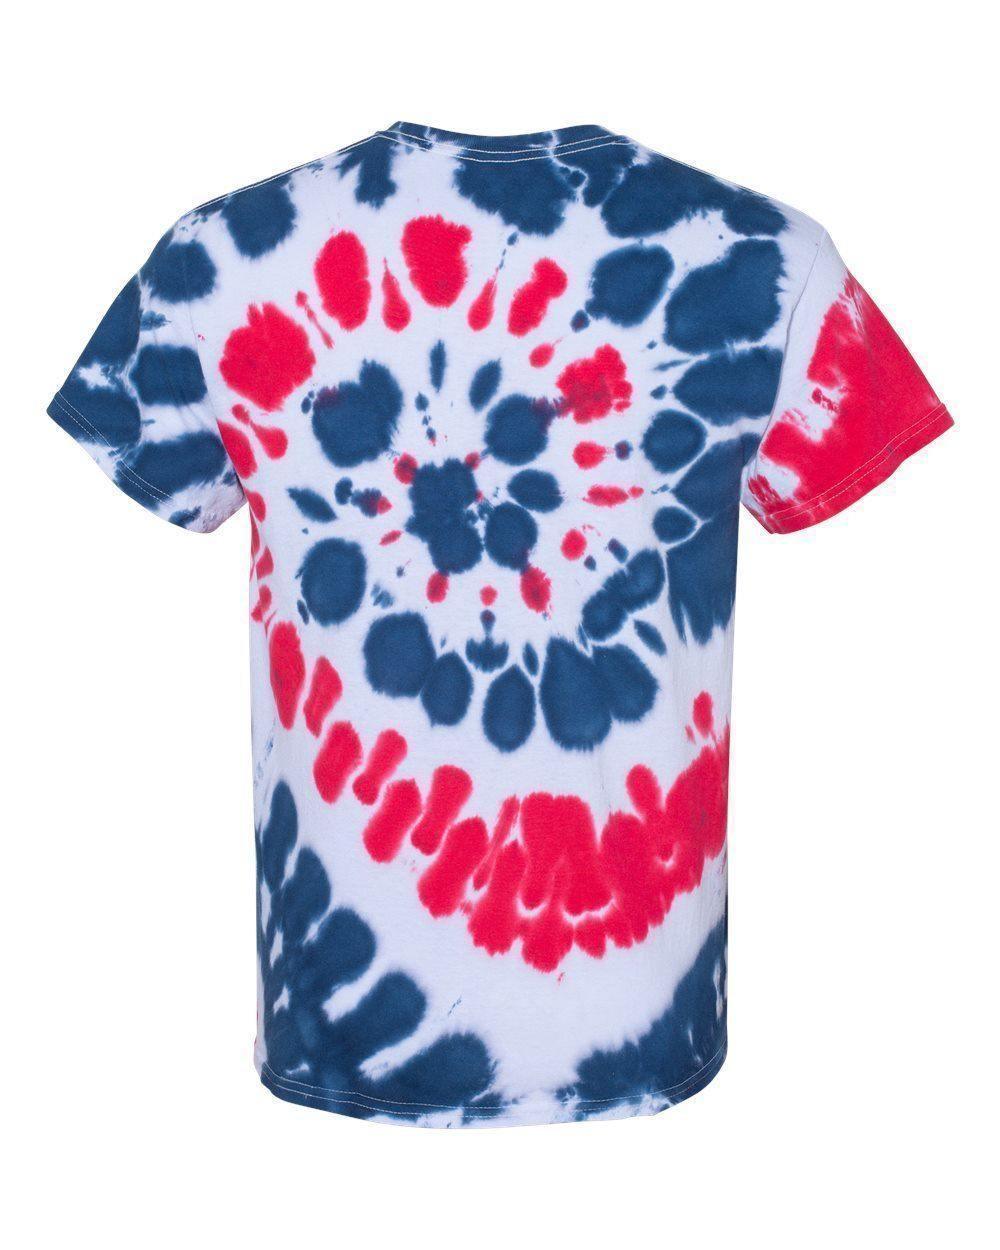 USA Tie Dye T-Shirt - Constantly Create Shop